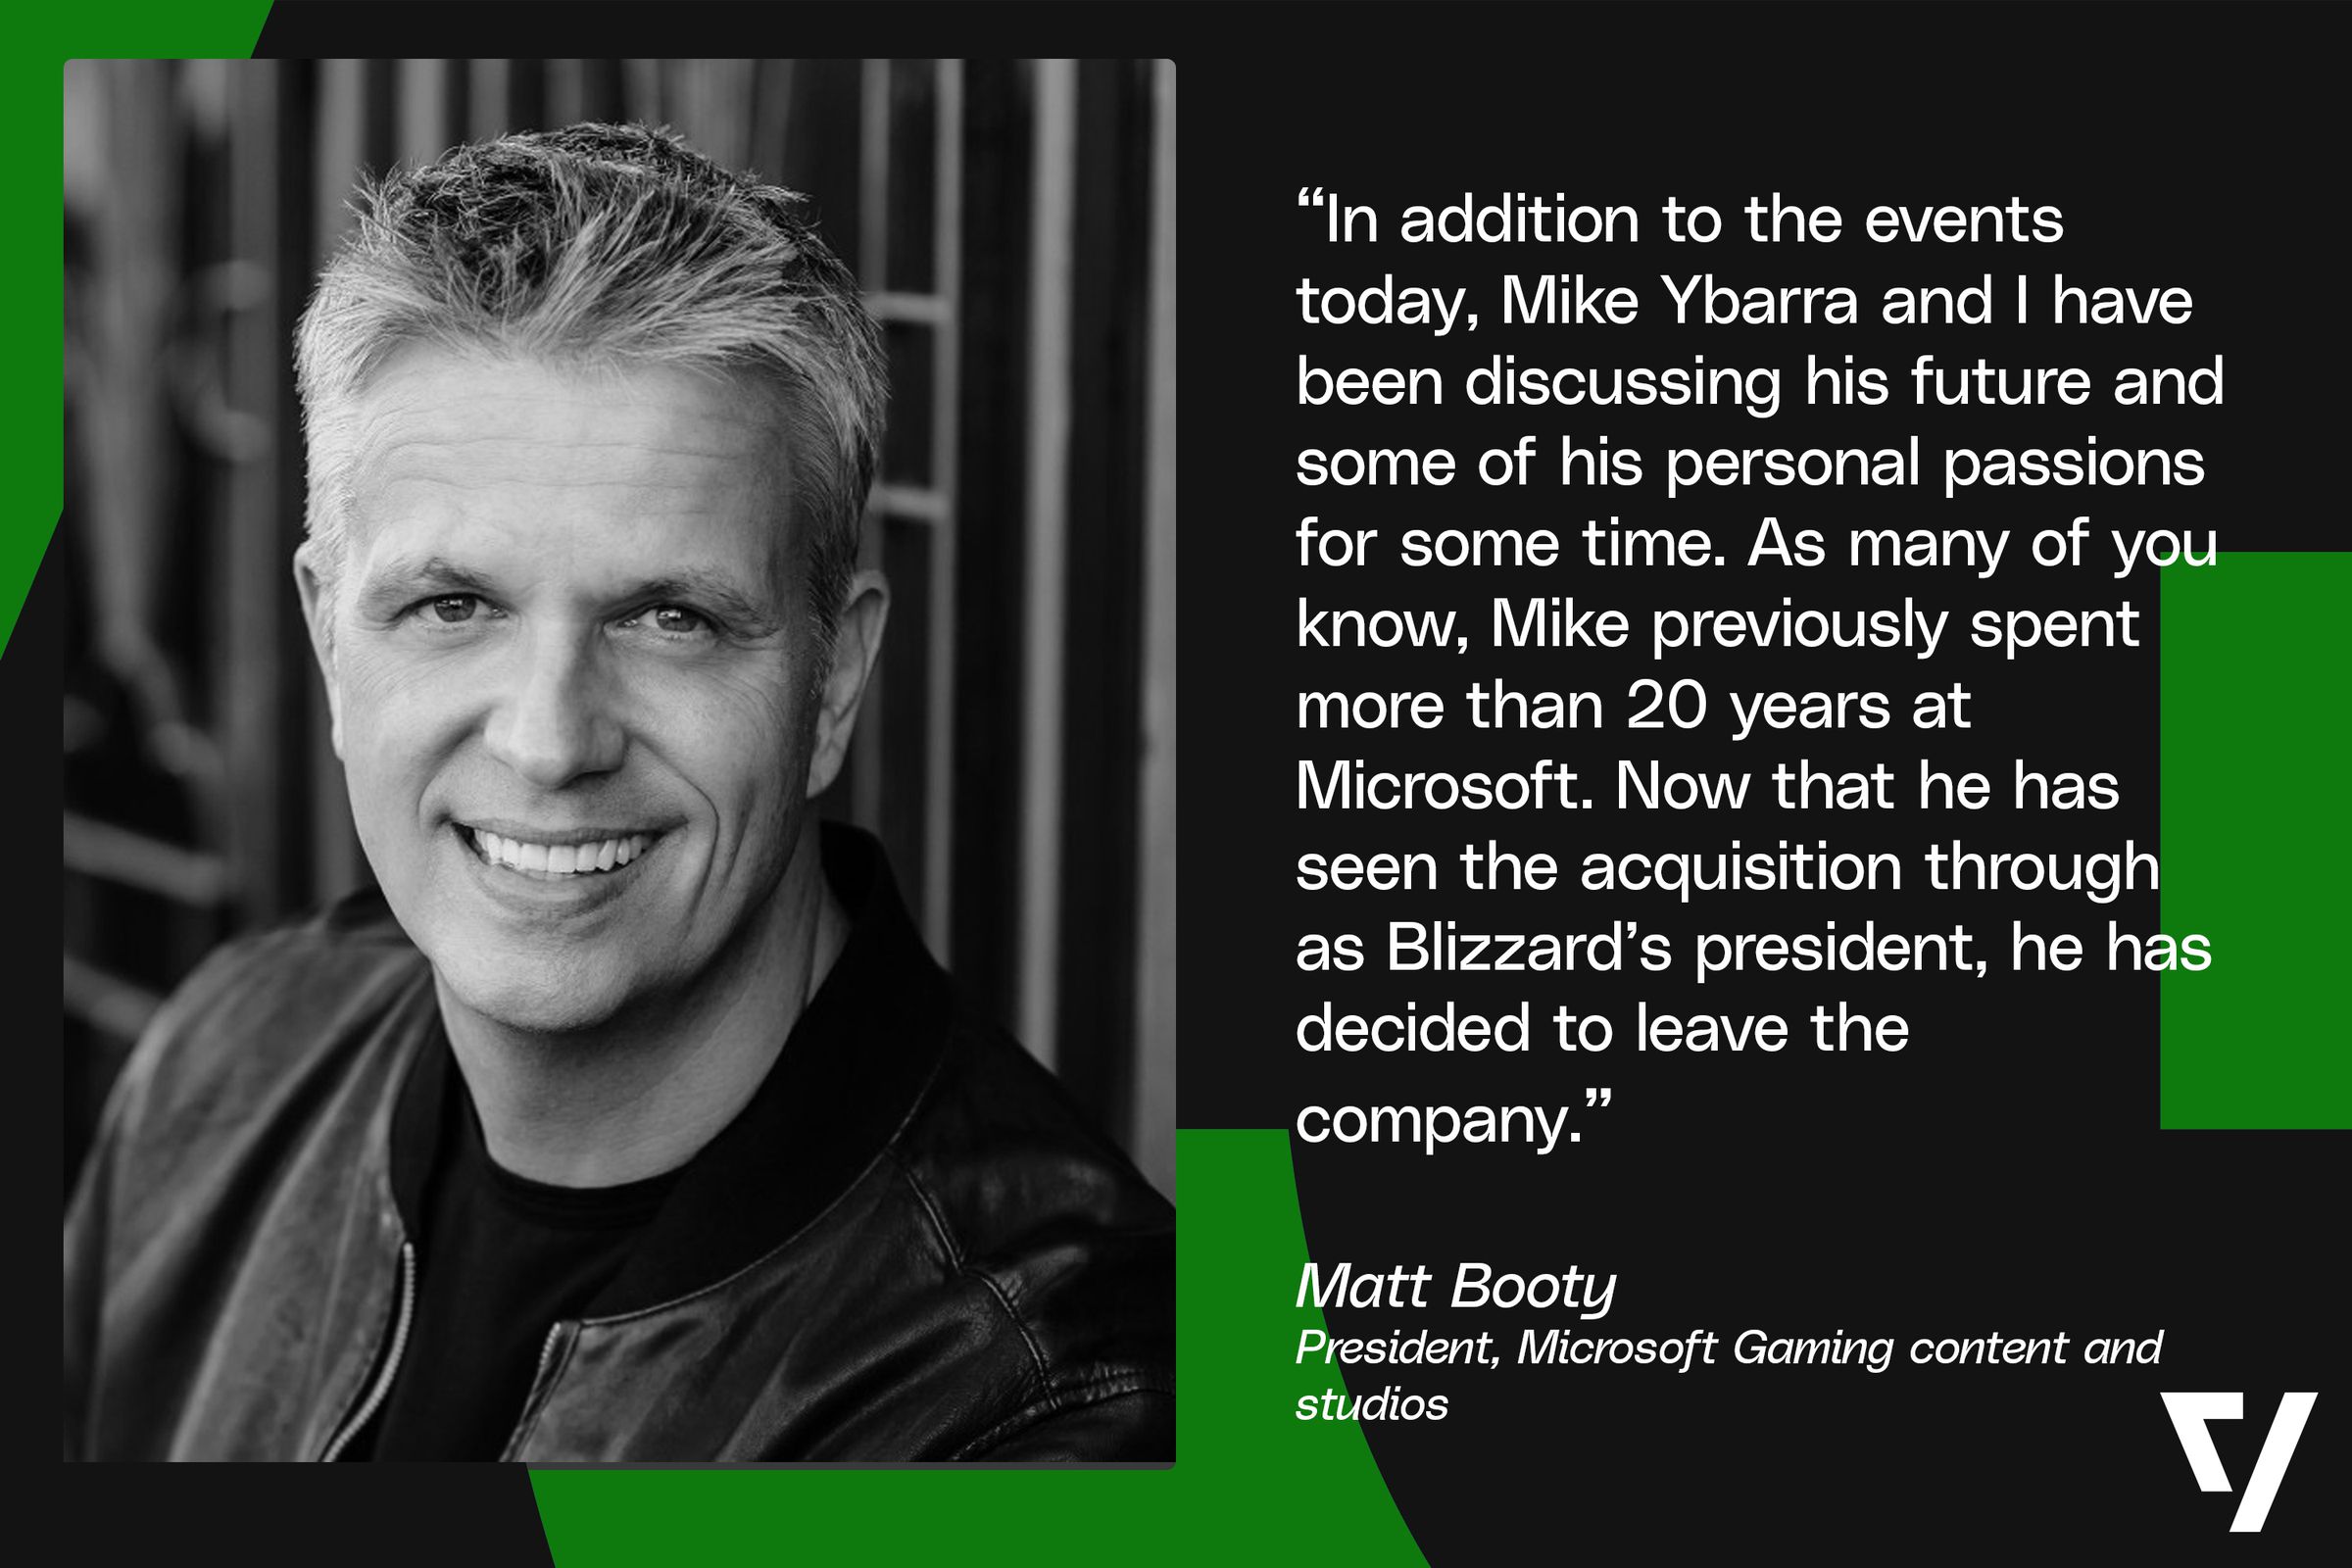 “In addition to the events today, Mike Ybarra and I have been discussing his future and some of his personal passions for some time. As many of you know, Mike previously spent more than 20 years at Microsoft. Now that he has seen the acquisition through as Blizzard’s president, he has decided to leave the company.” Matt Booty - President, Microsoft Gaming content and studios